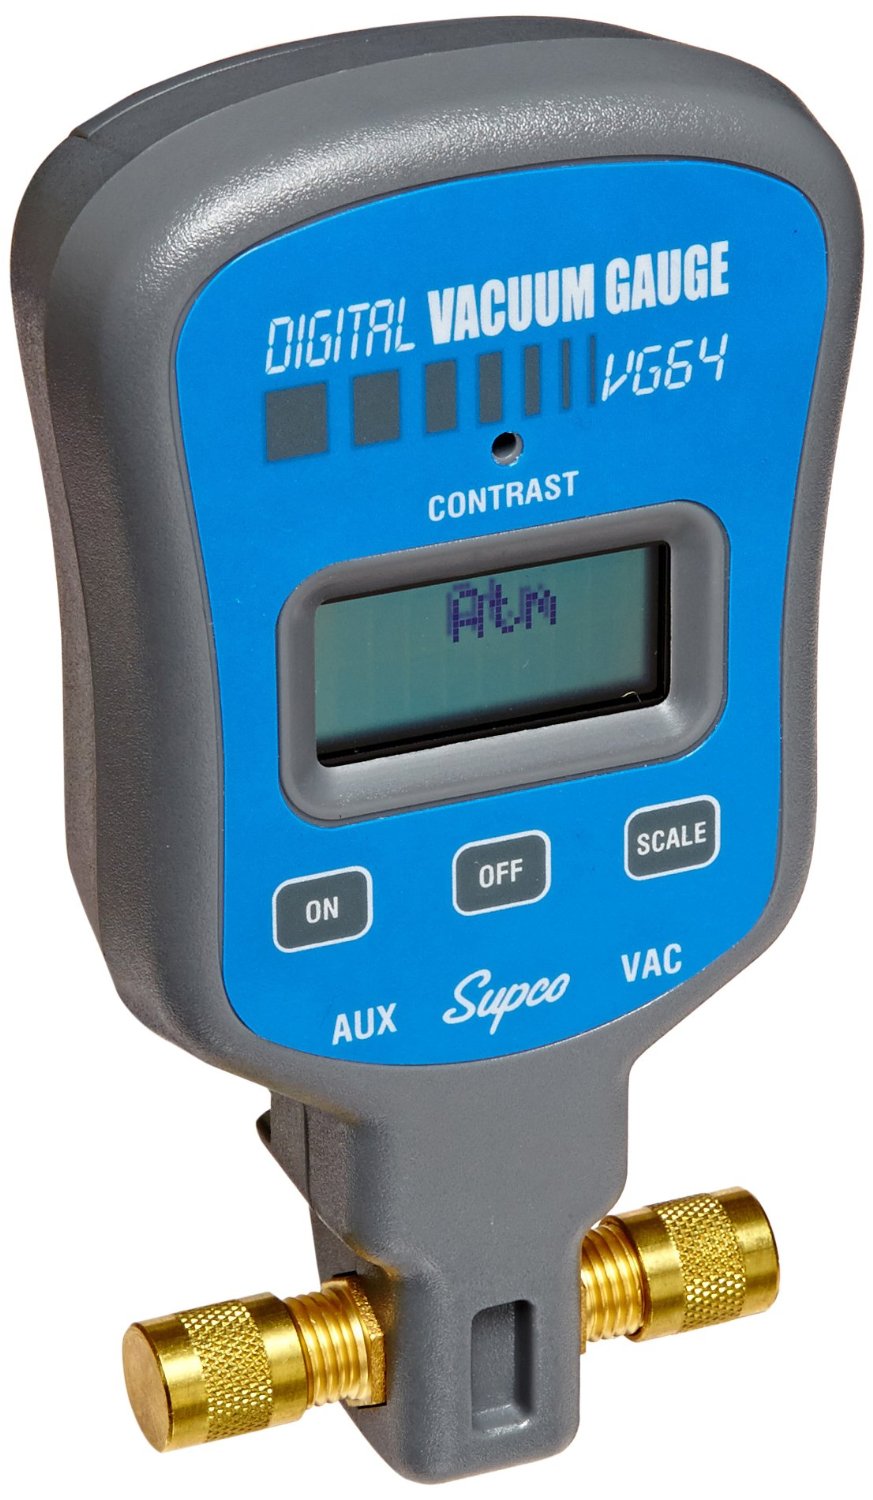 SUPCO VG64 VACUUM GAUGE, DIGITAL DISPLAY, 0-12000 MICRONS RANGE, 10% ACCURACY, 1/4inch MALE FLARE FITTING CONNECTION